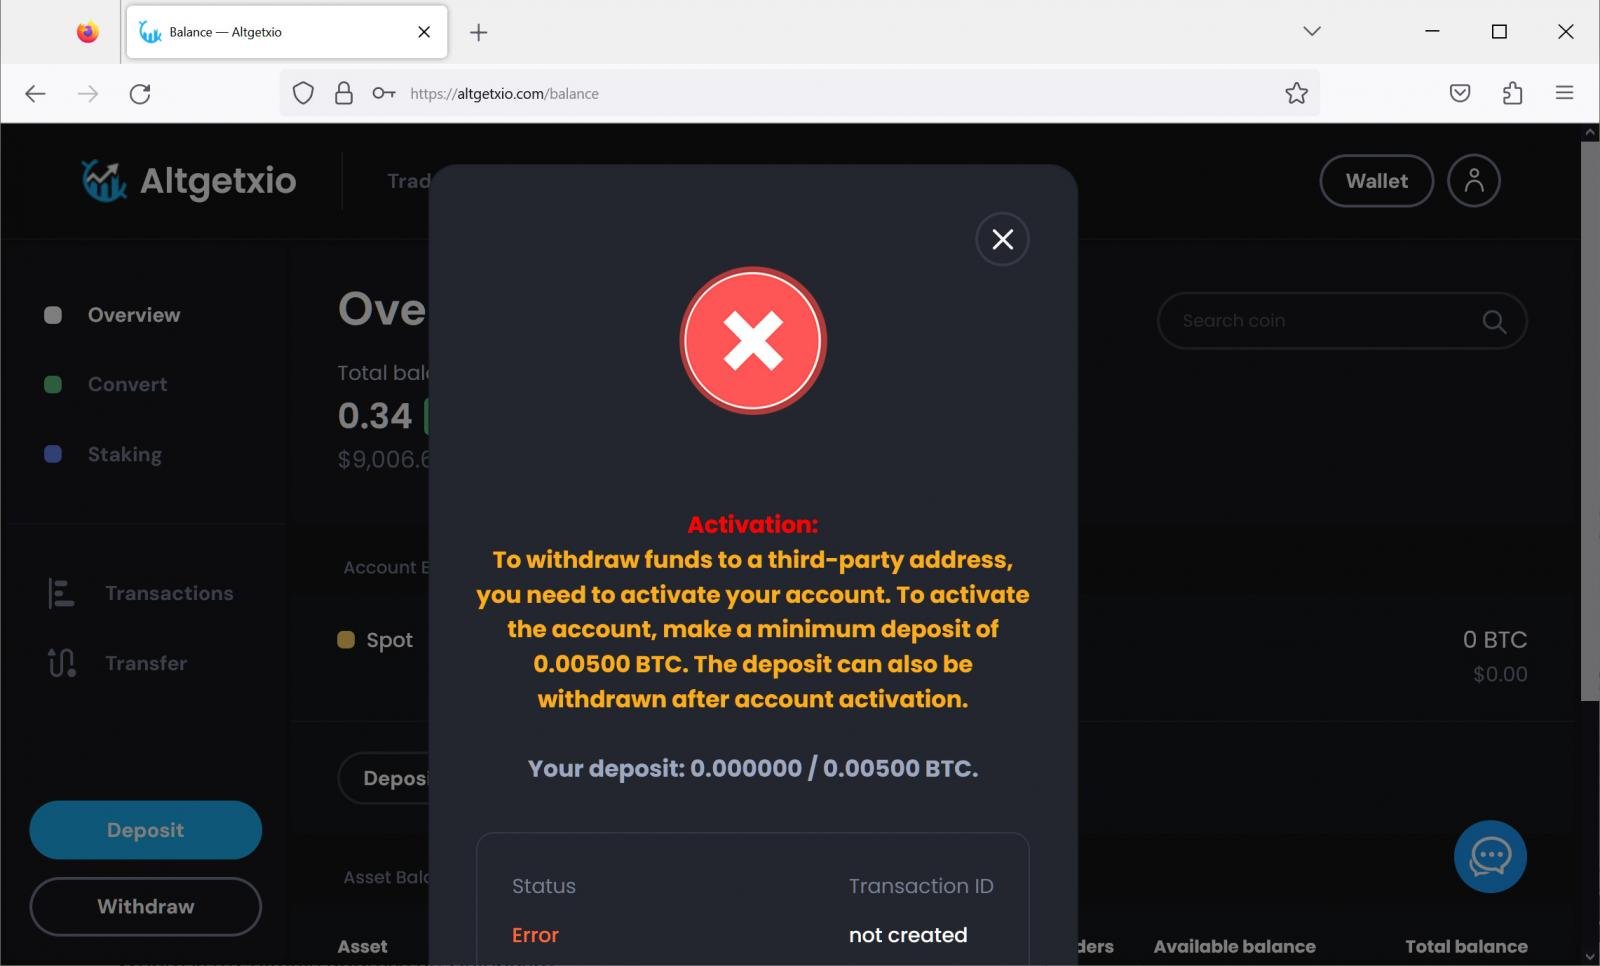 Scam site requires .005 bitcoin deposit to activate the account